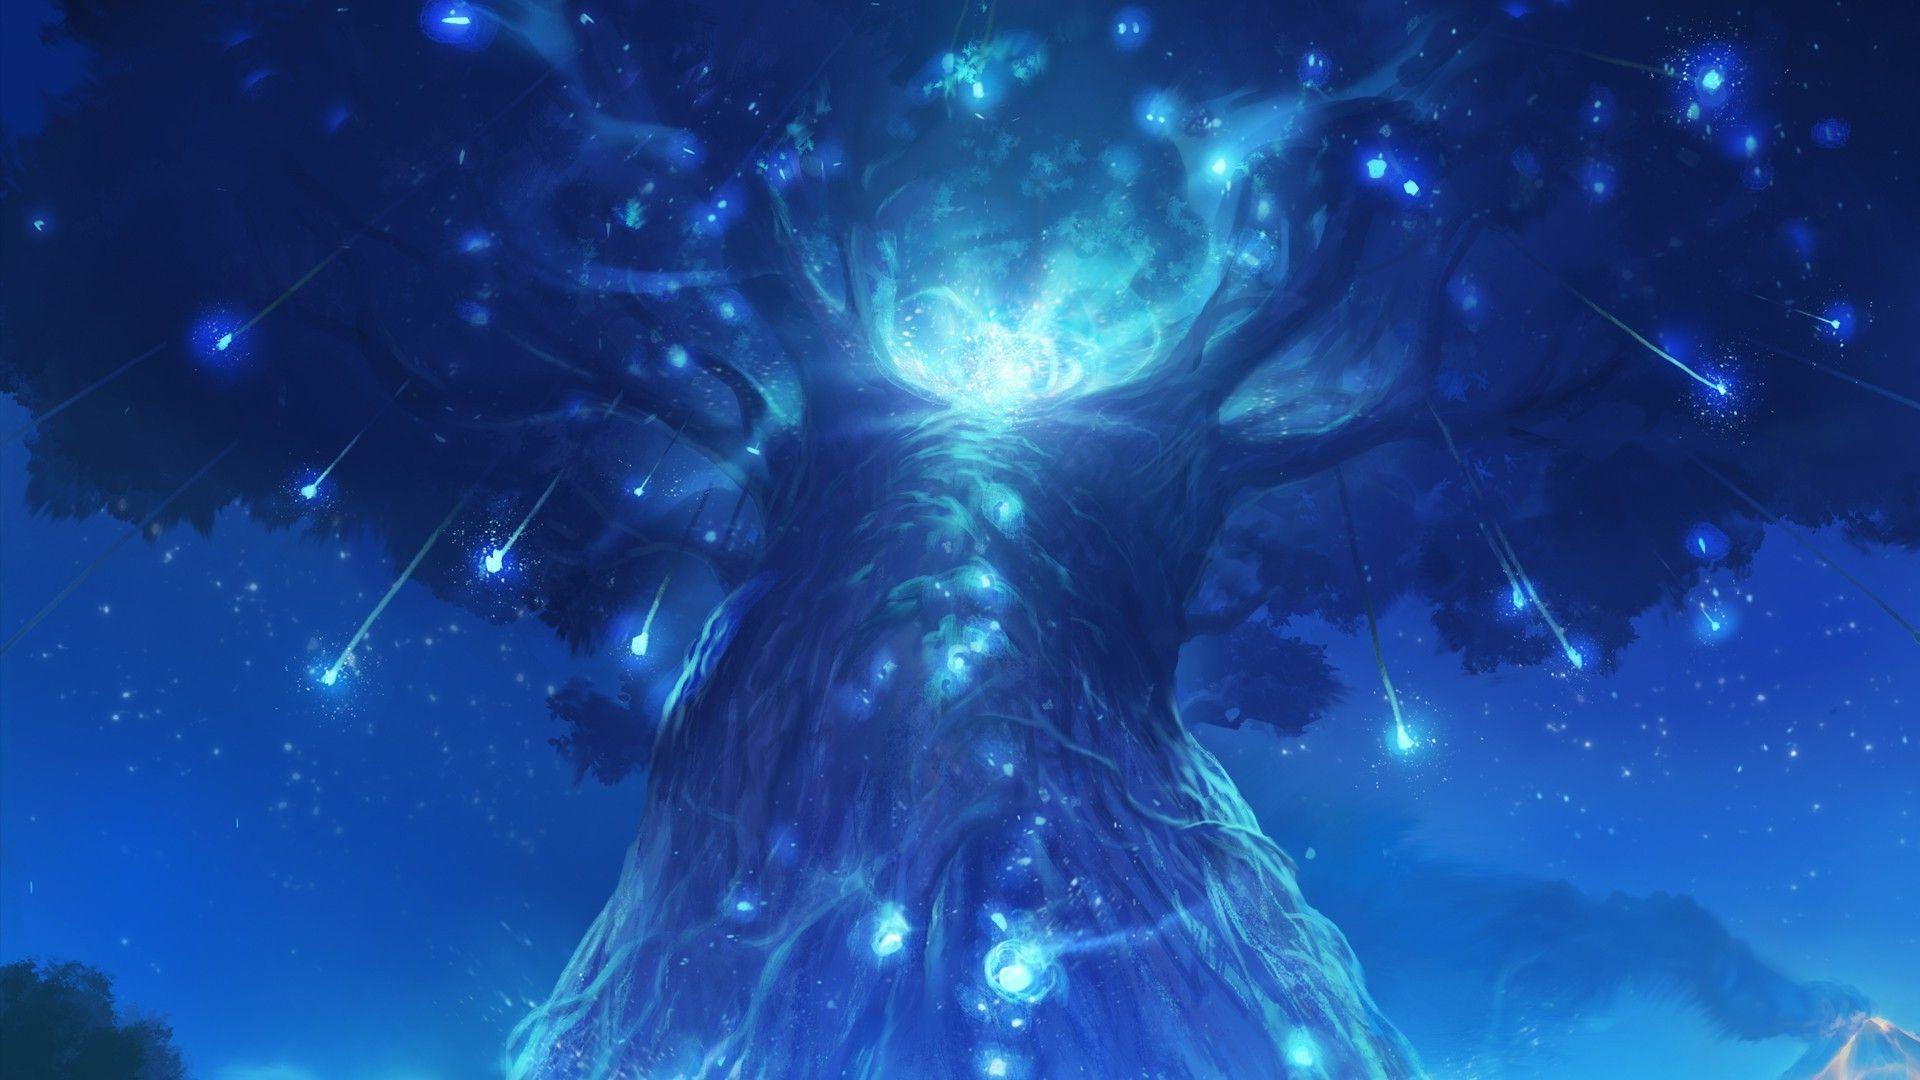 Ori And The Blind Forest, Forest, Trees, Spirits, Landscape